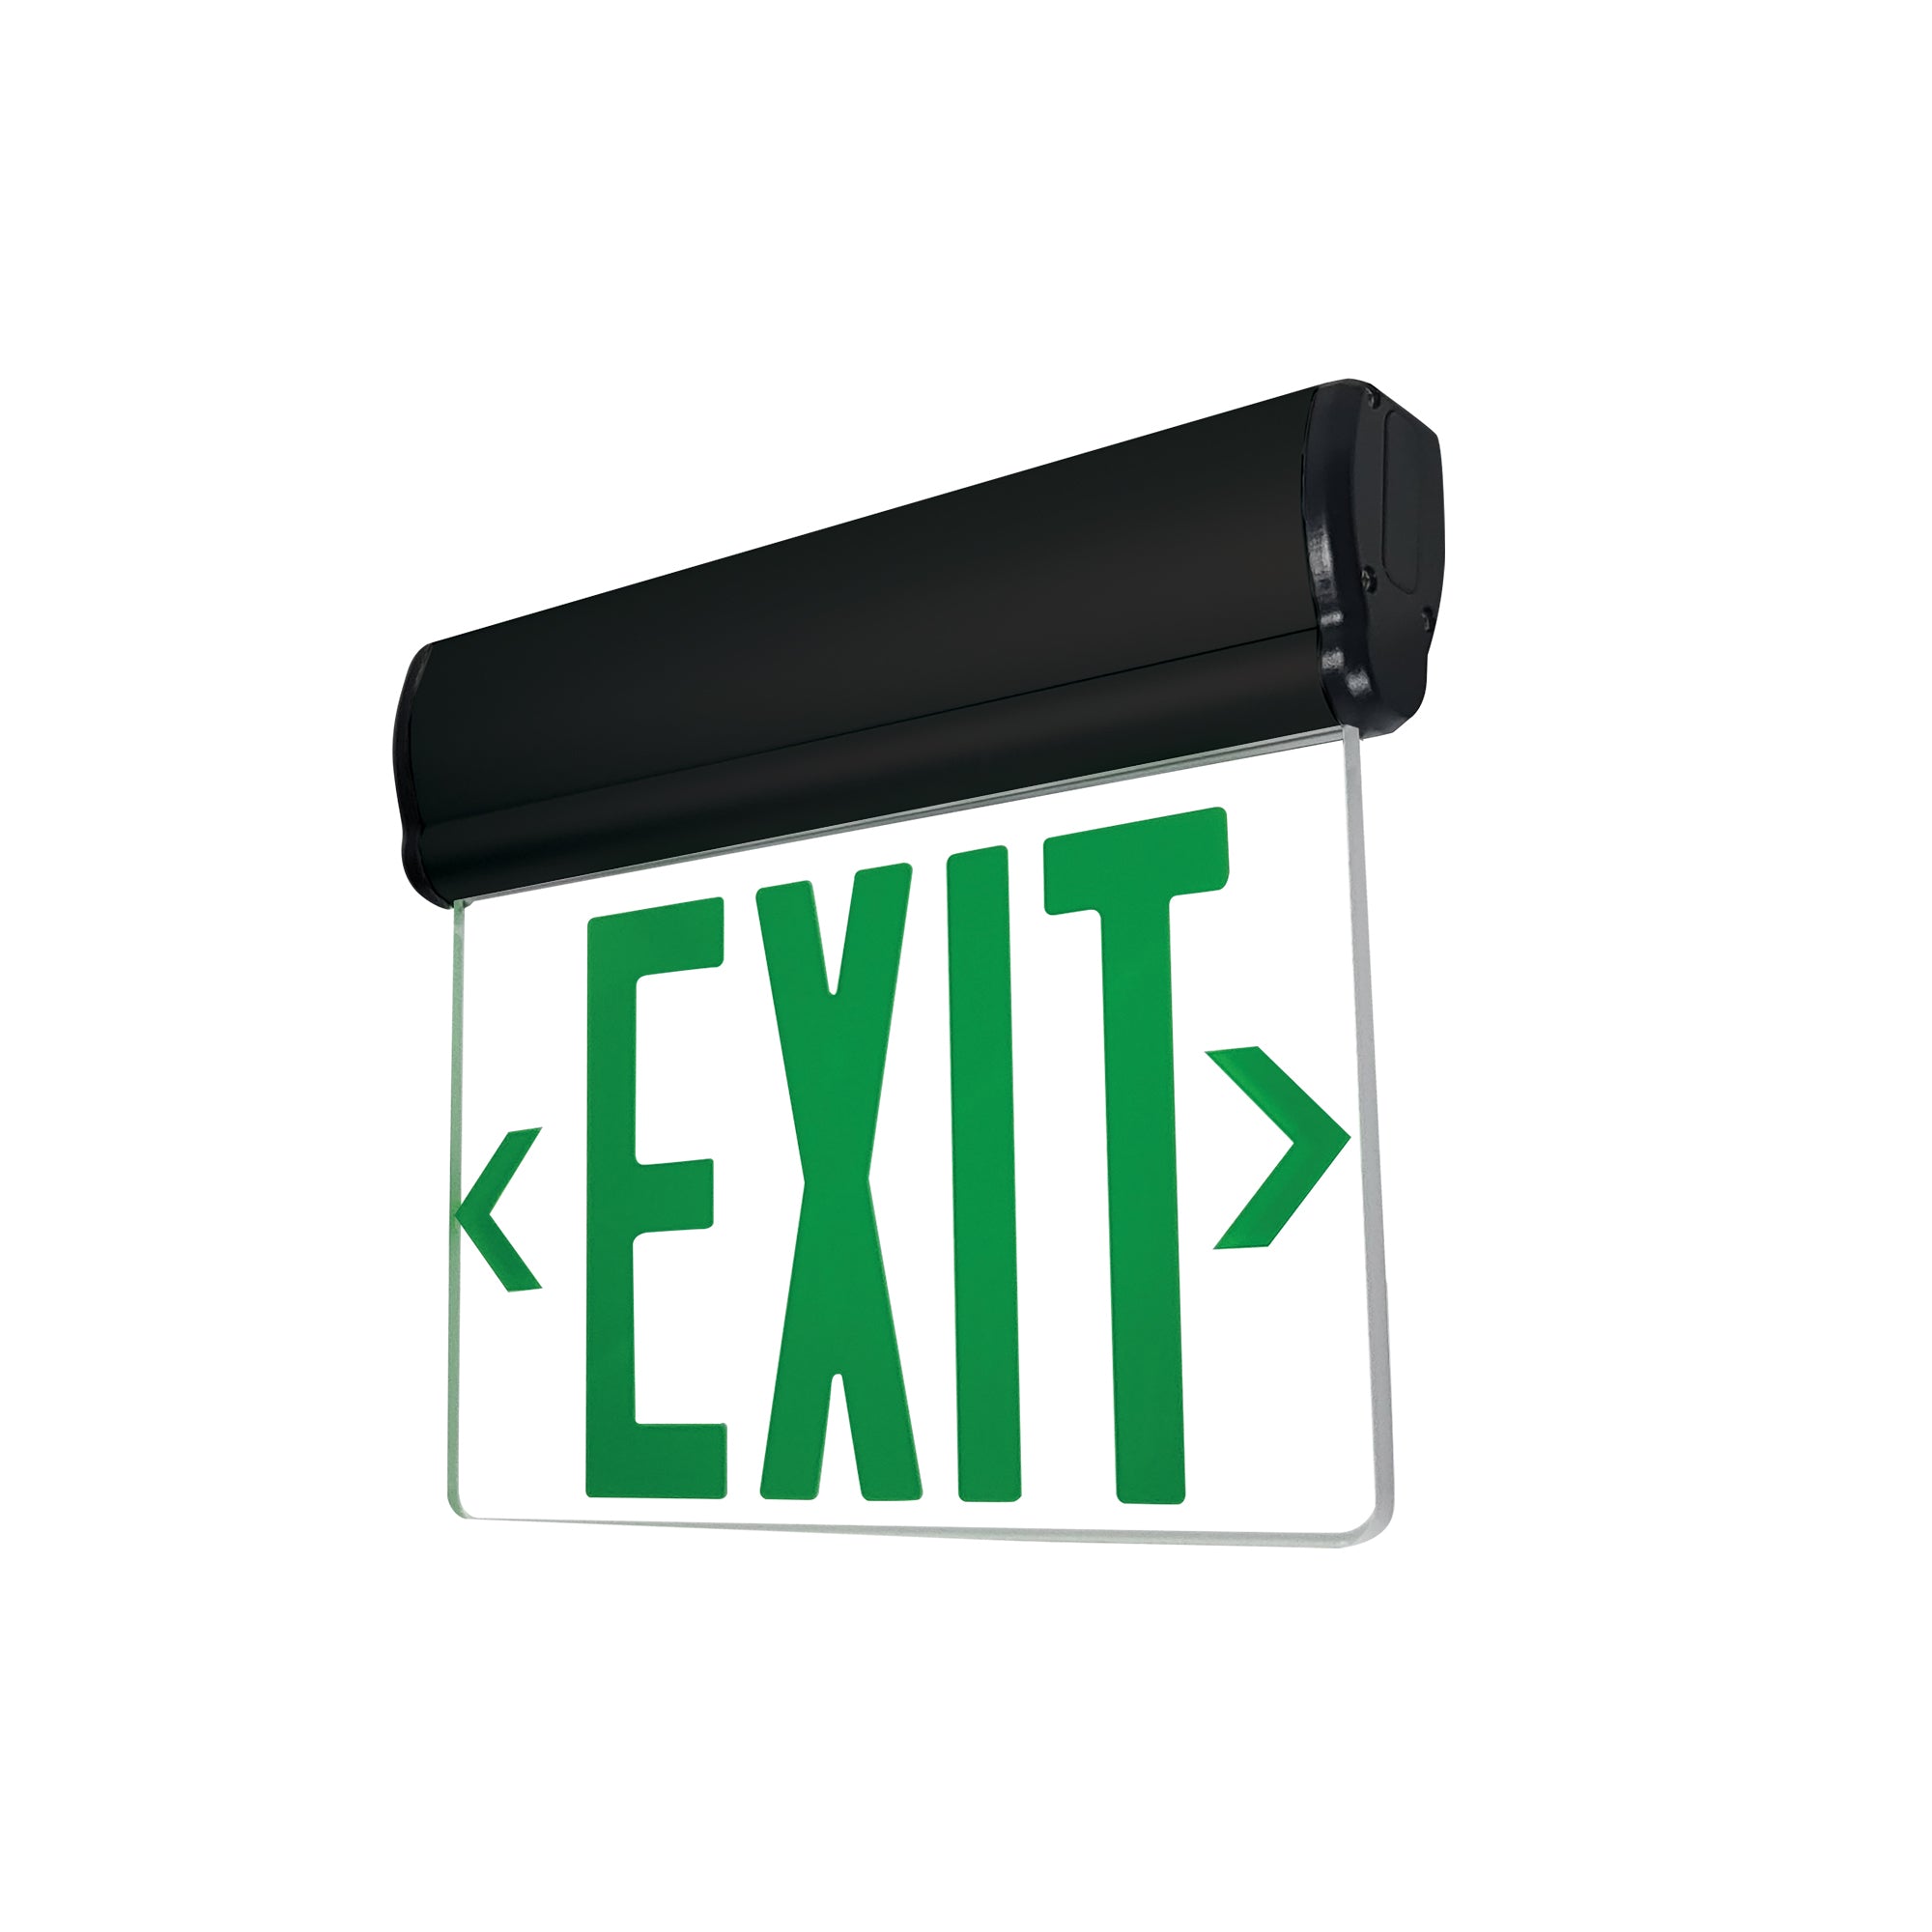 Nora Lighting NX-810-LEDGCB - Exit / Emergency - Surface Adjustable LED Edge-Lit Exit Sign, AC only, 6 Inch Green Letters, Single Face / Clear Acrylic, Black Housing